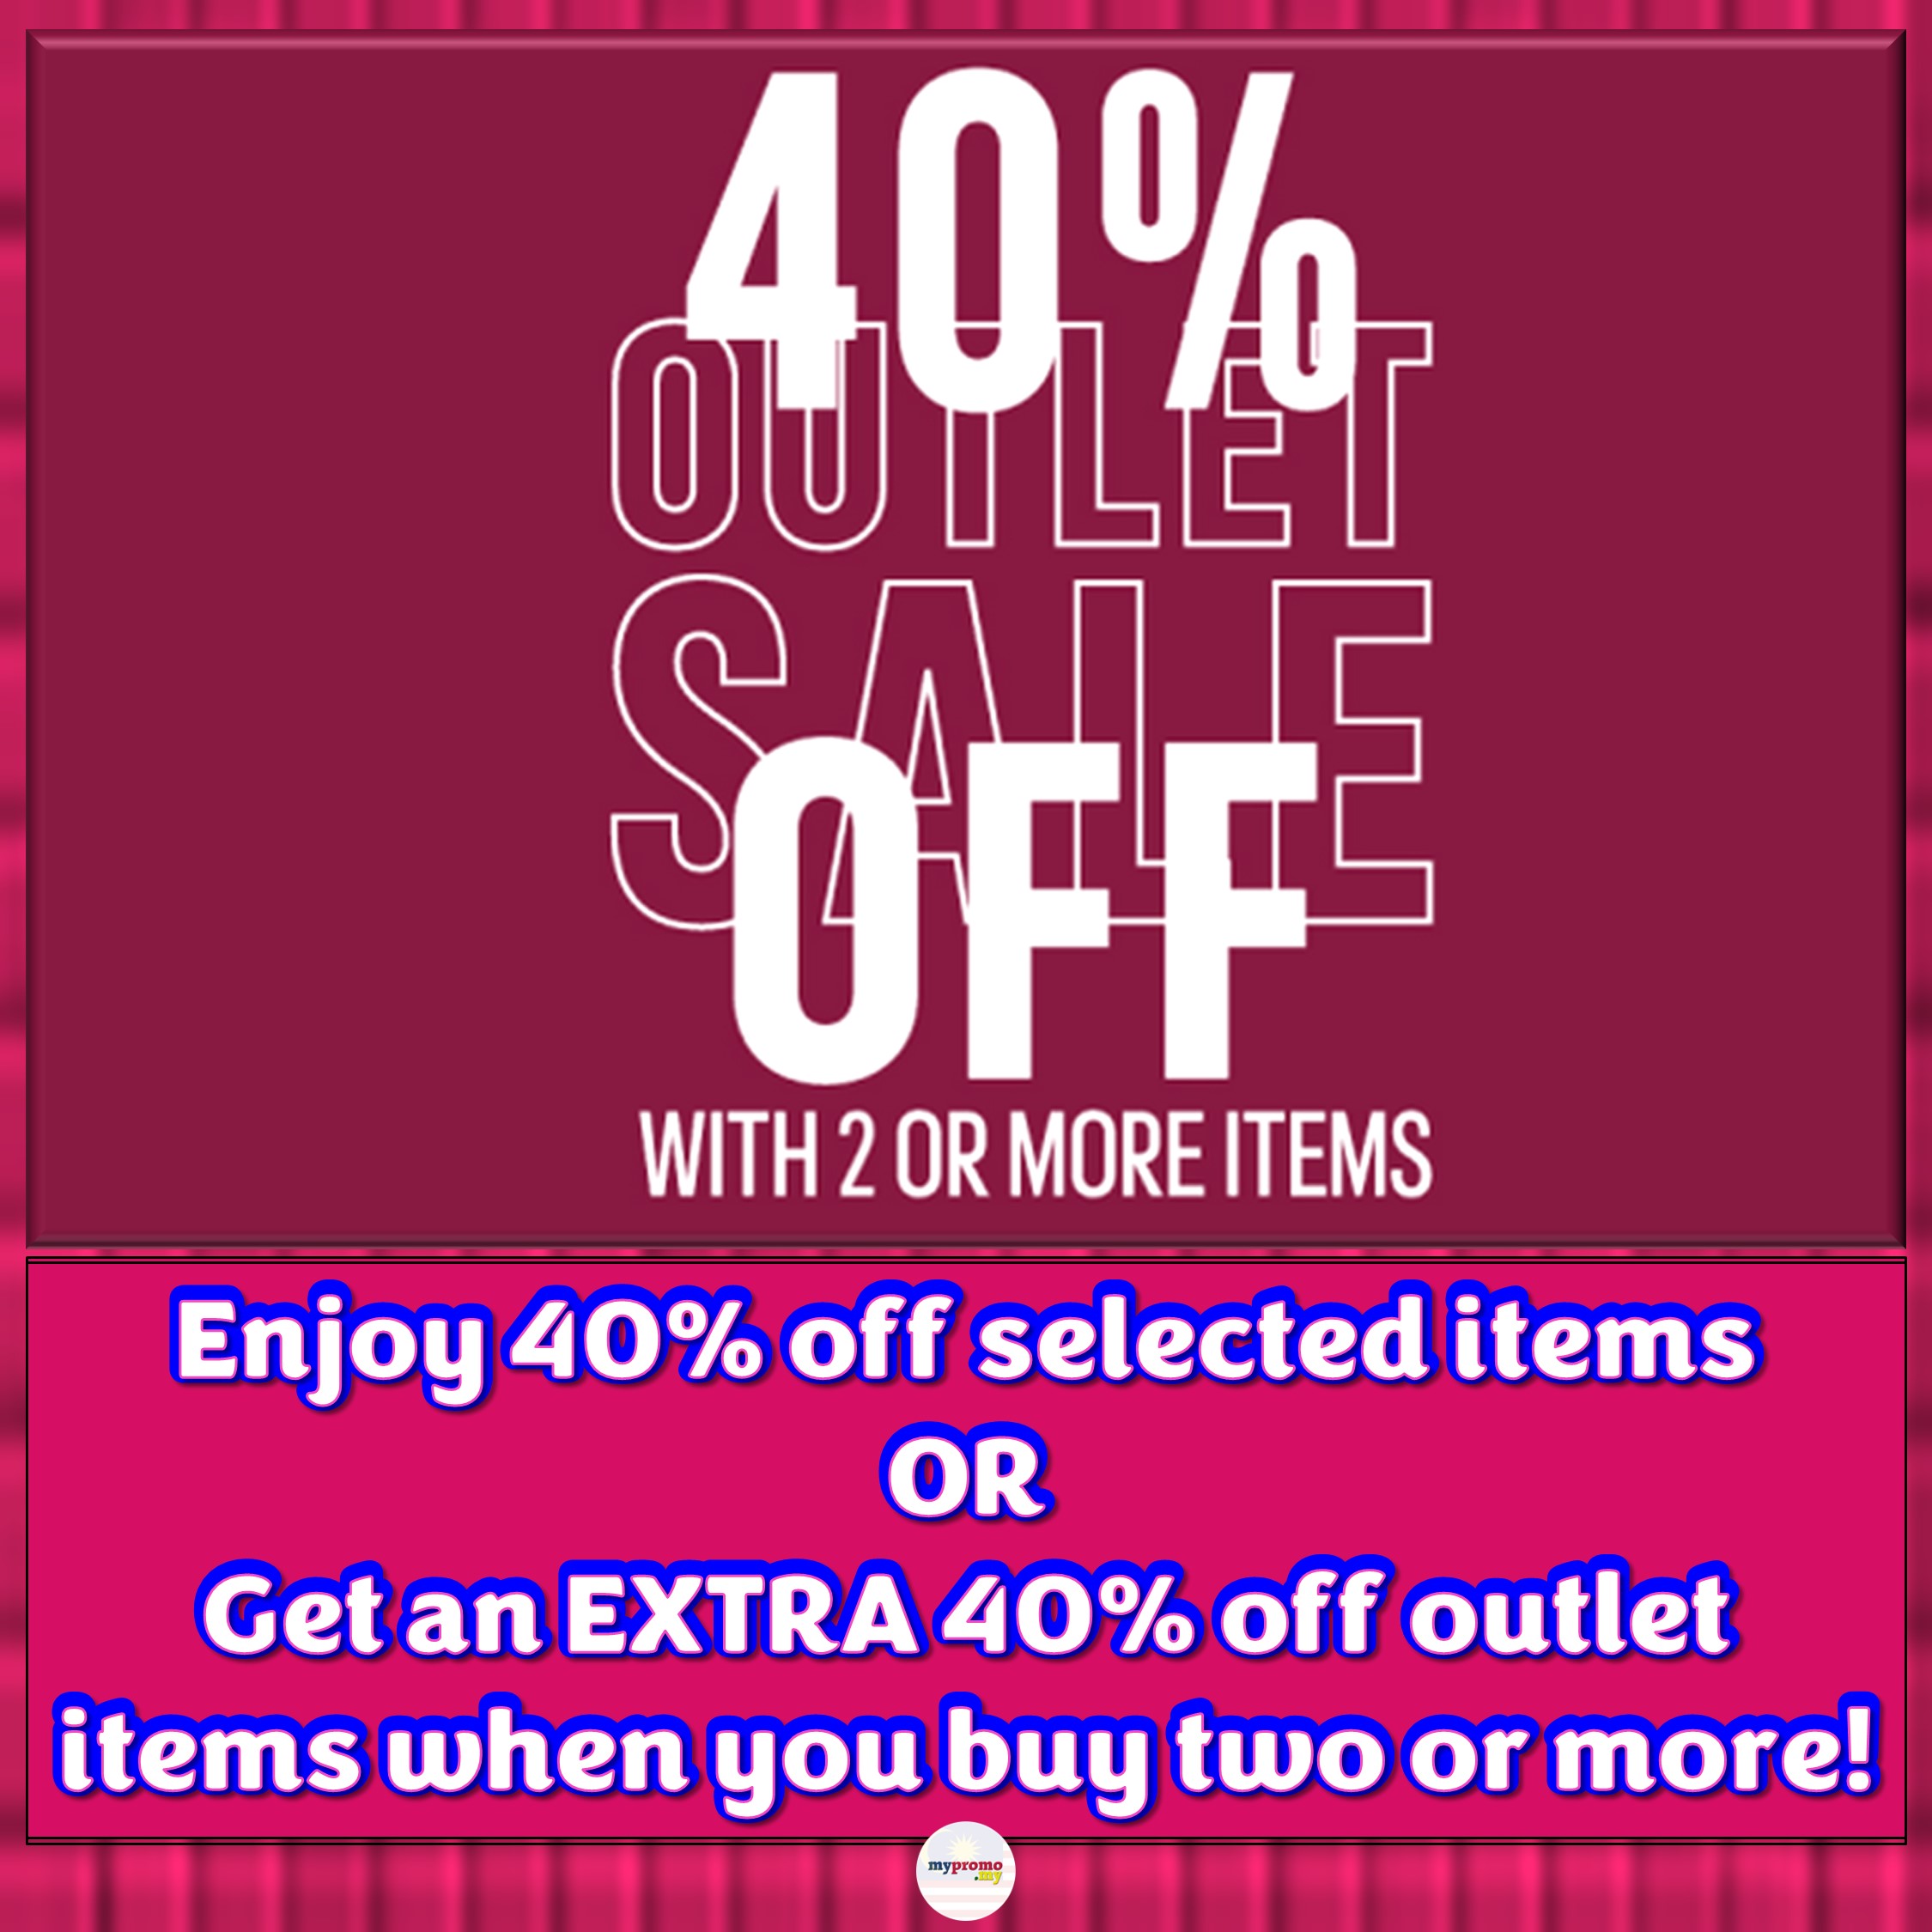 Adidas Outlet Sale: Get Extra 40% OFF